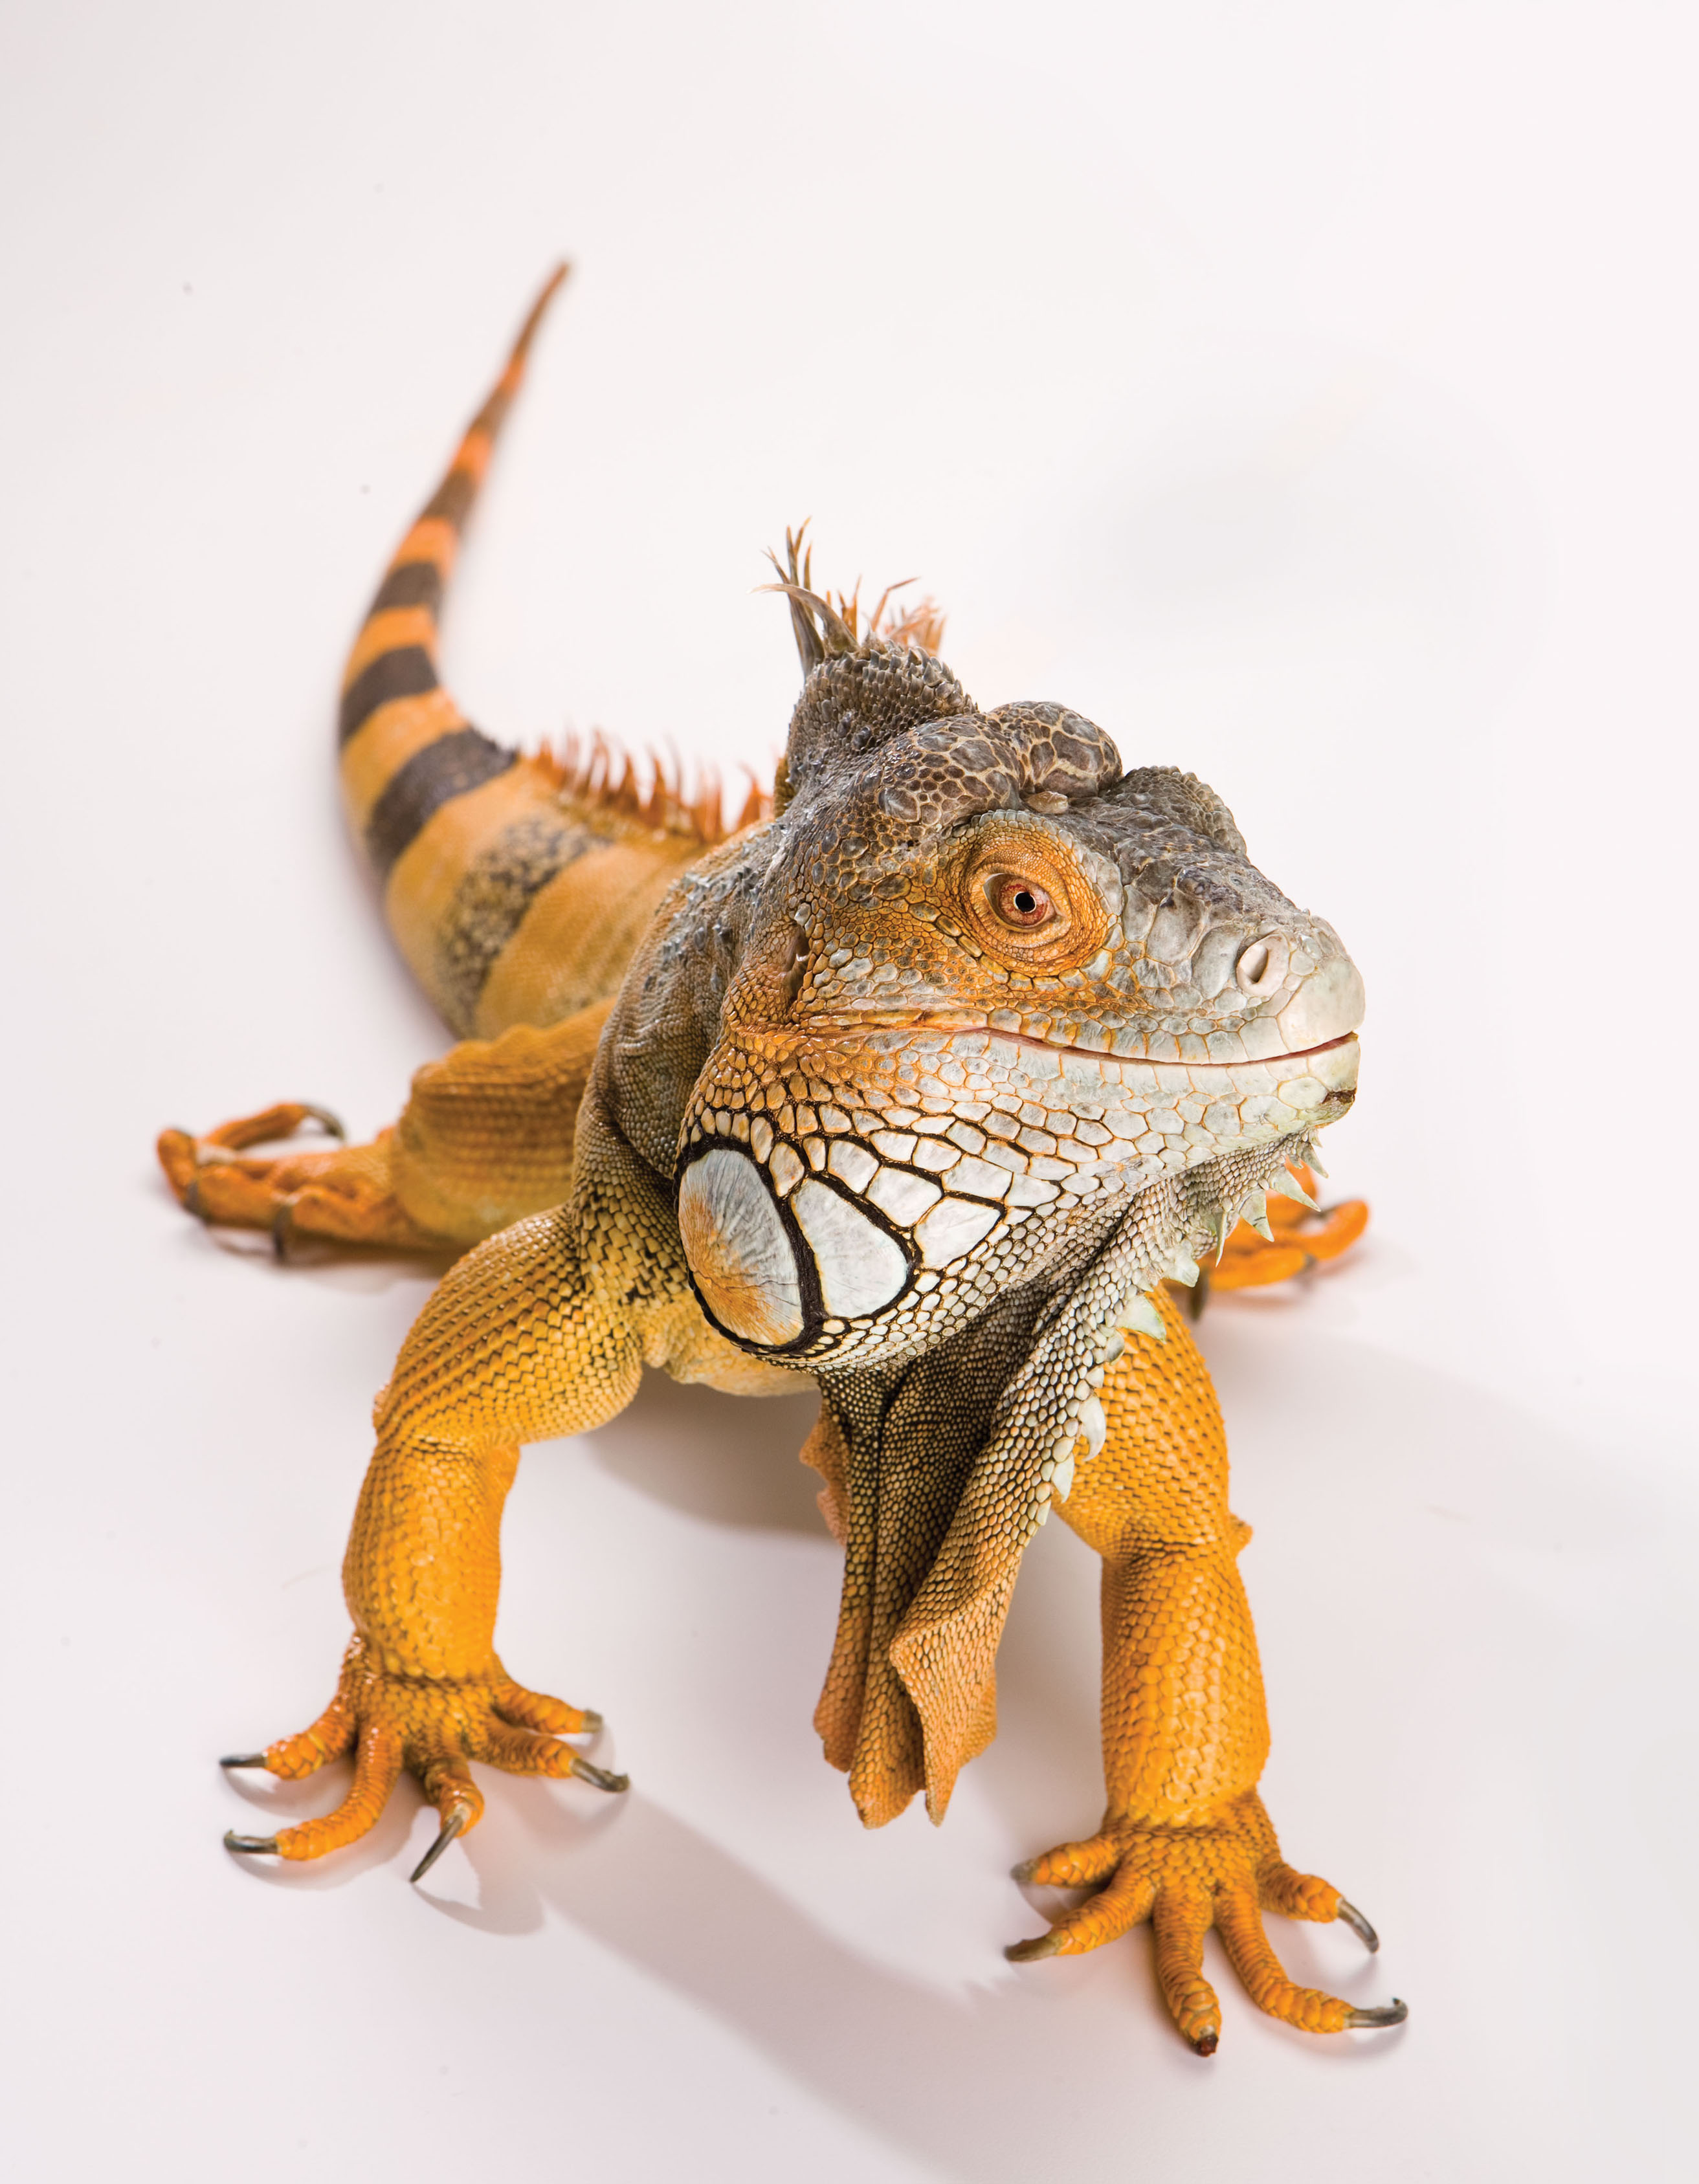 Like his namesake, Elvis the Iguana is a charismatic celebrity whole unique performances captivate young audiences around the state. As both an artist and a zoological phenomenon, Elvis embodies the inclusiveness of the college that is home to 24 art and science disciplines.